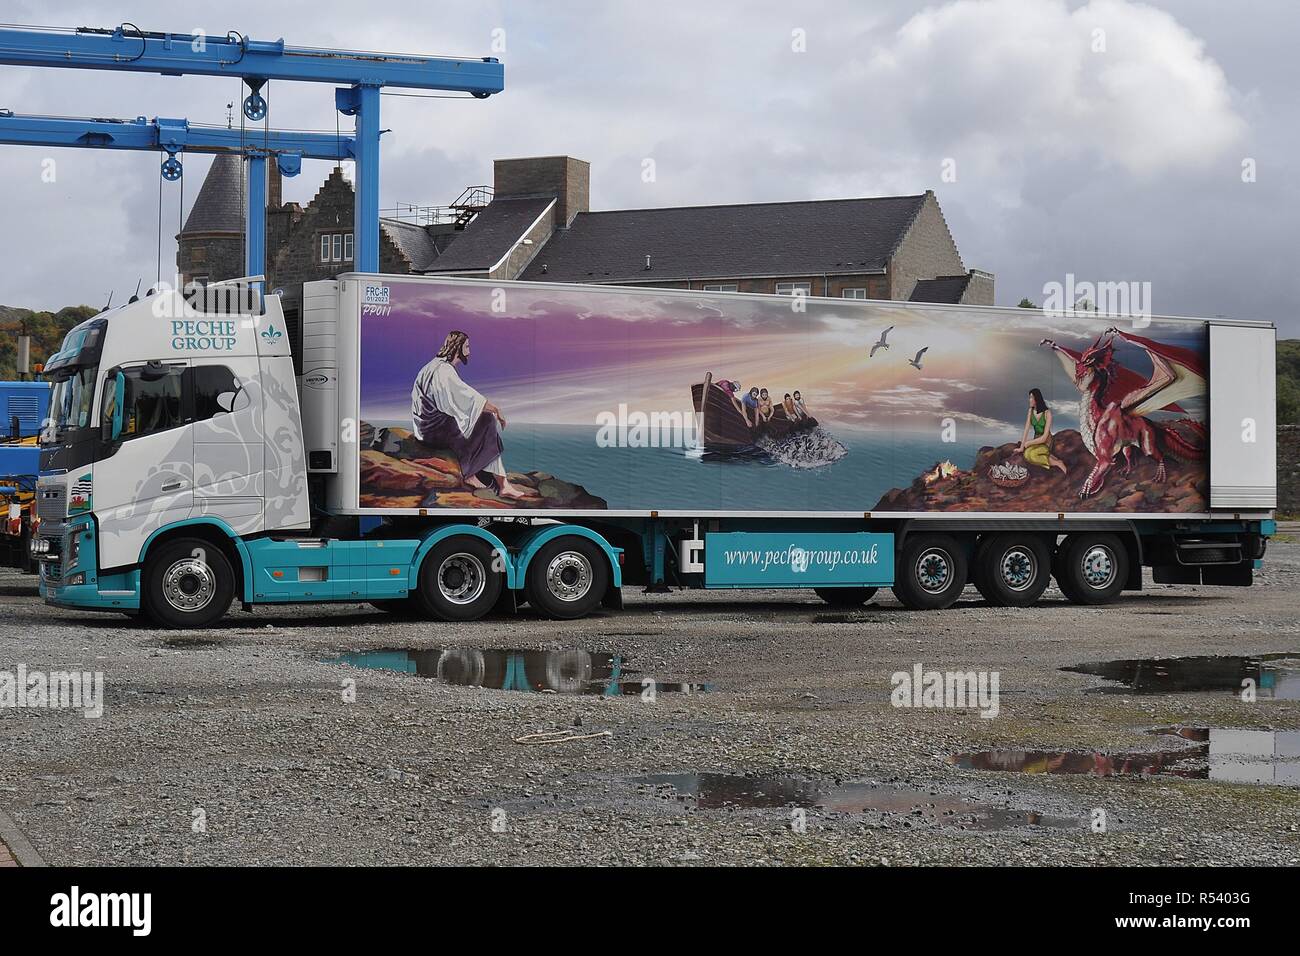 PECHE GROUP REFRIGERATED TRUCK WITH ARTWORK ON THE SIDE Stock Photo